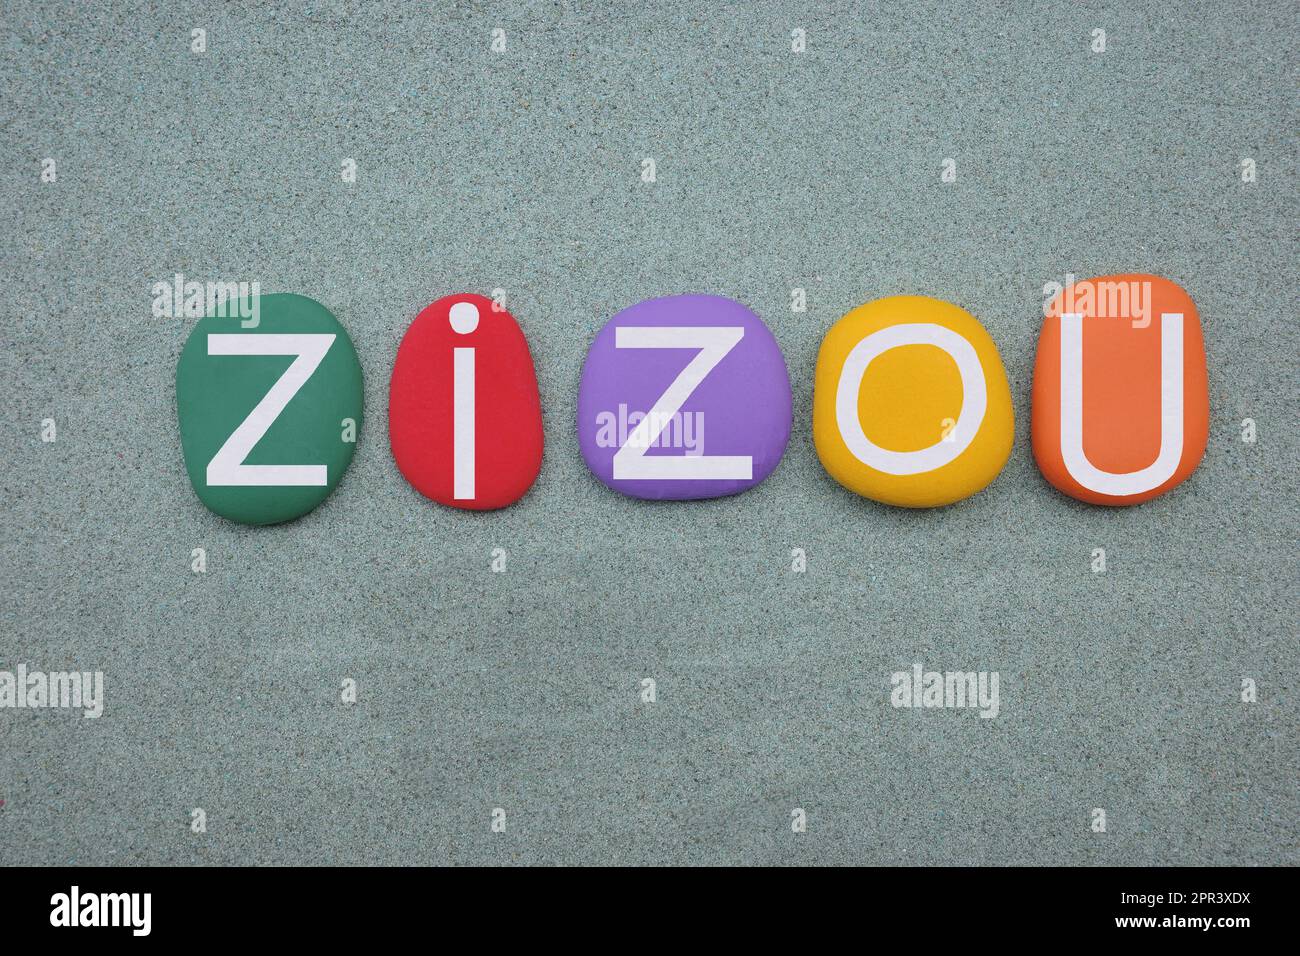 Zizou, masculine given name composed with multi colored stone letters over green sand Stock Photo